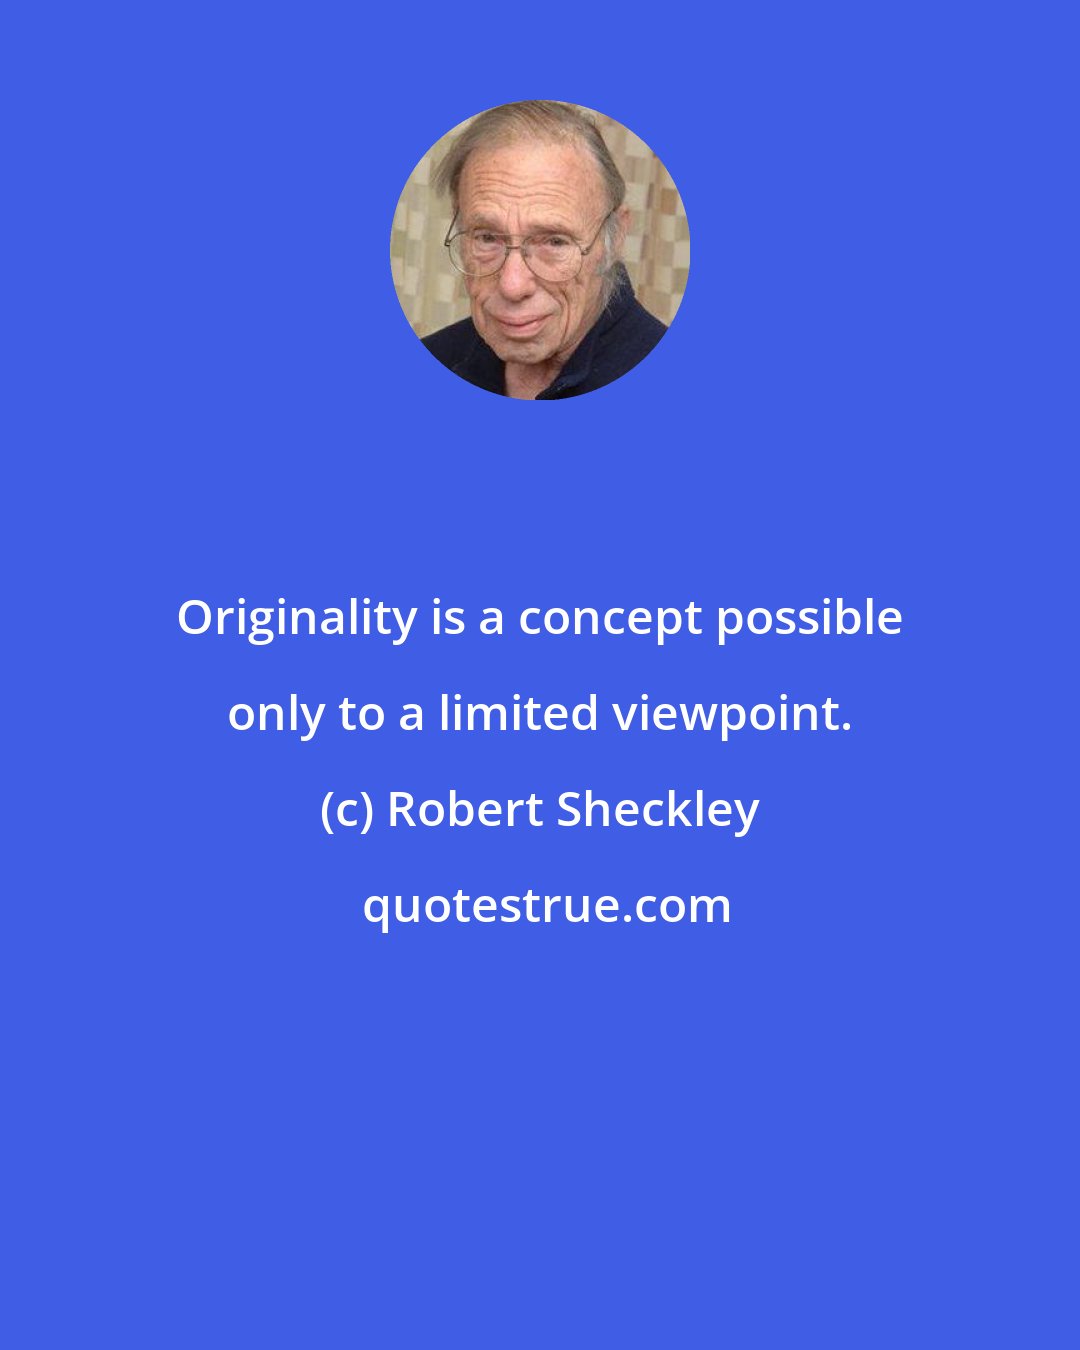 Robert Sheckley: Originality is a concept possible only to a limited viewpoint.